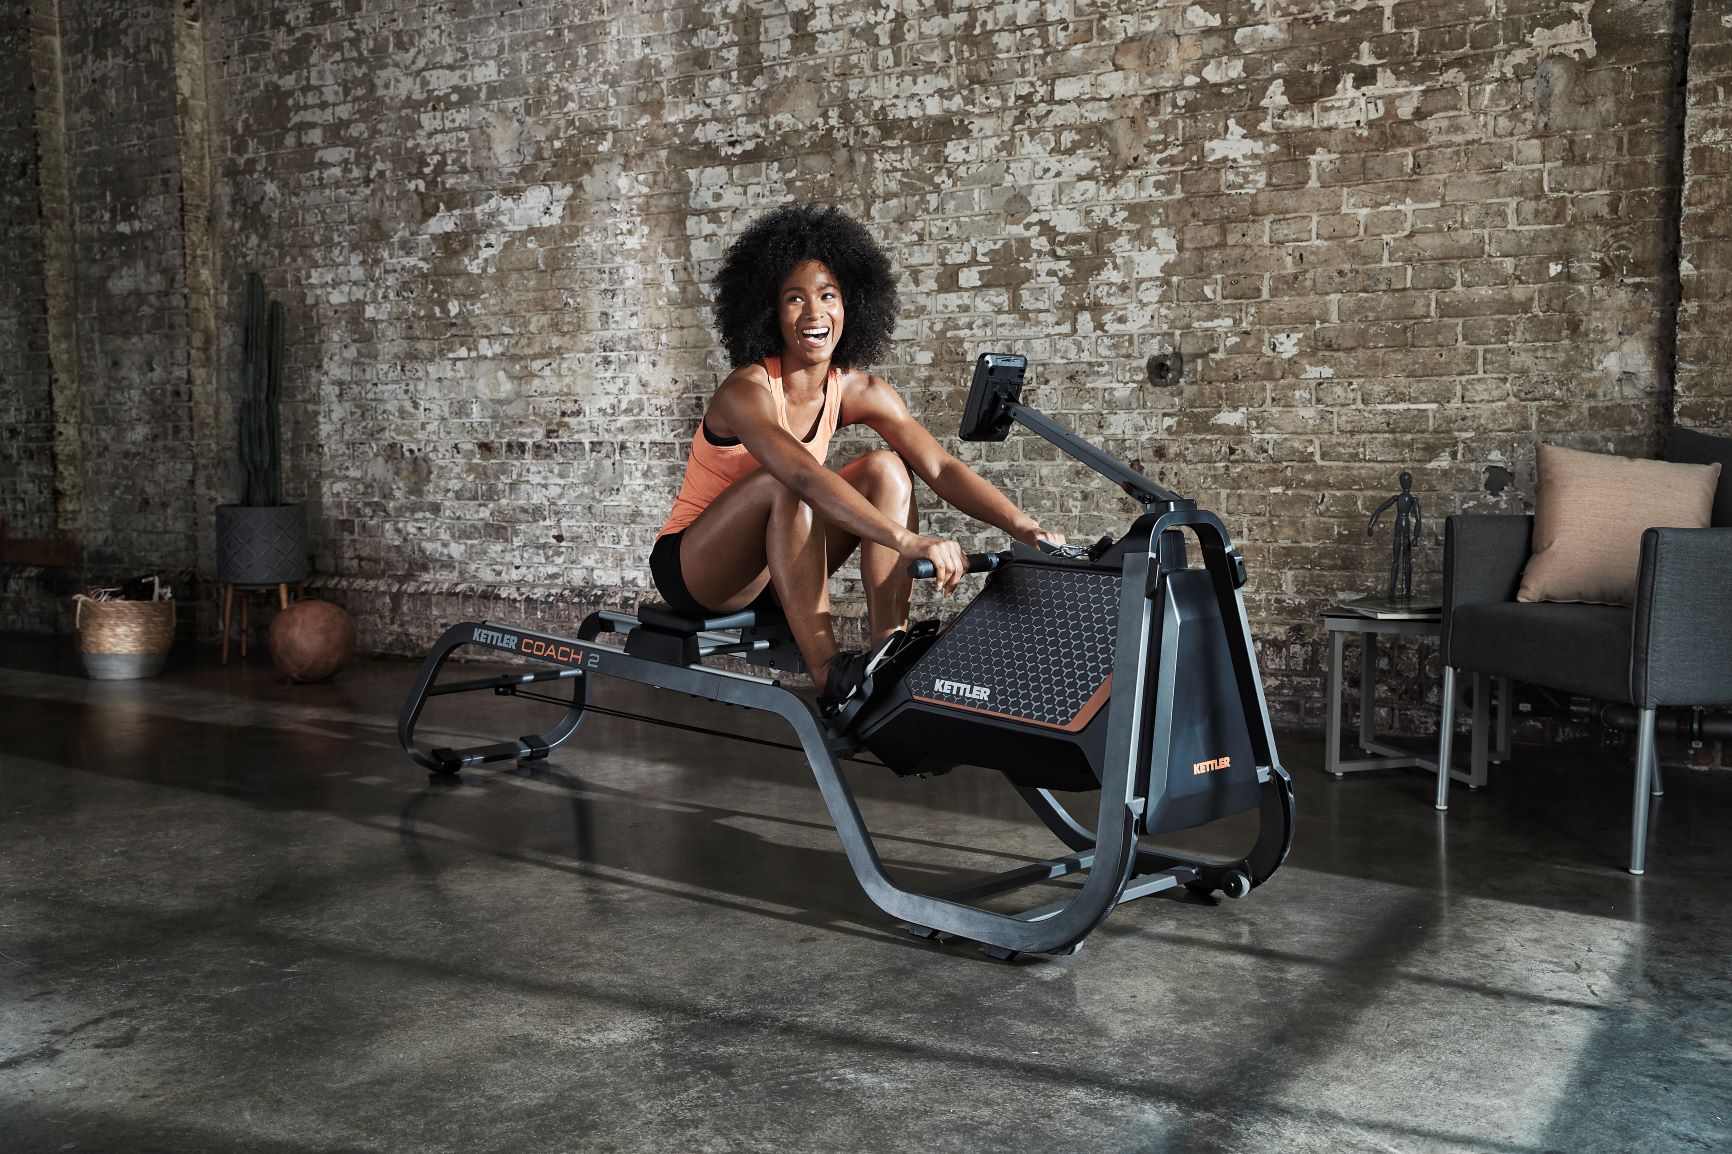 Lifestyle image of the Coach 2 Rowing Machine in use by smiling model.